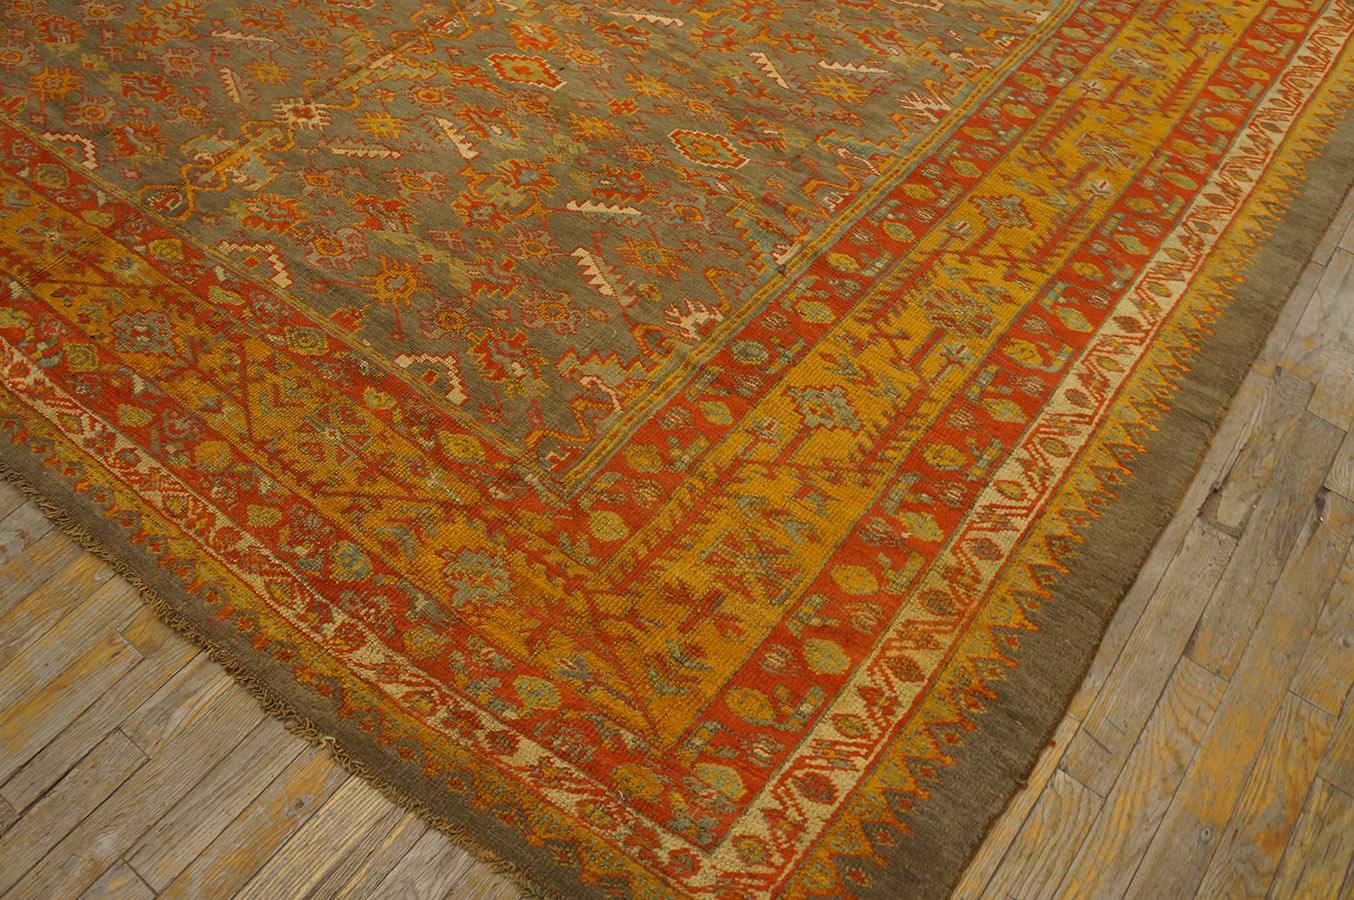 Late 19th Century Turkish Oushak Carpet ( 9'7'' x 11'3'' - 292 x 343 cm) In Good Condition For Sale In New York, NY